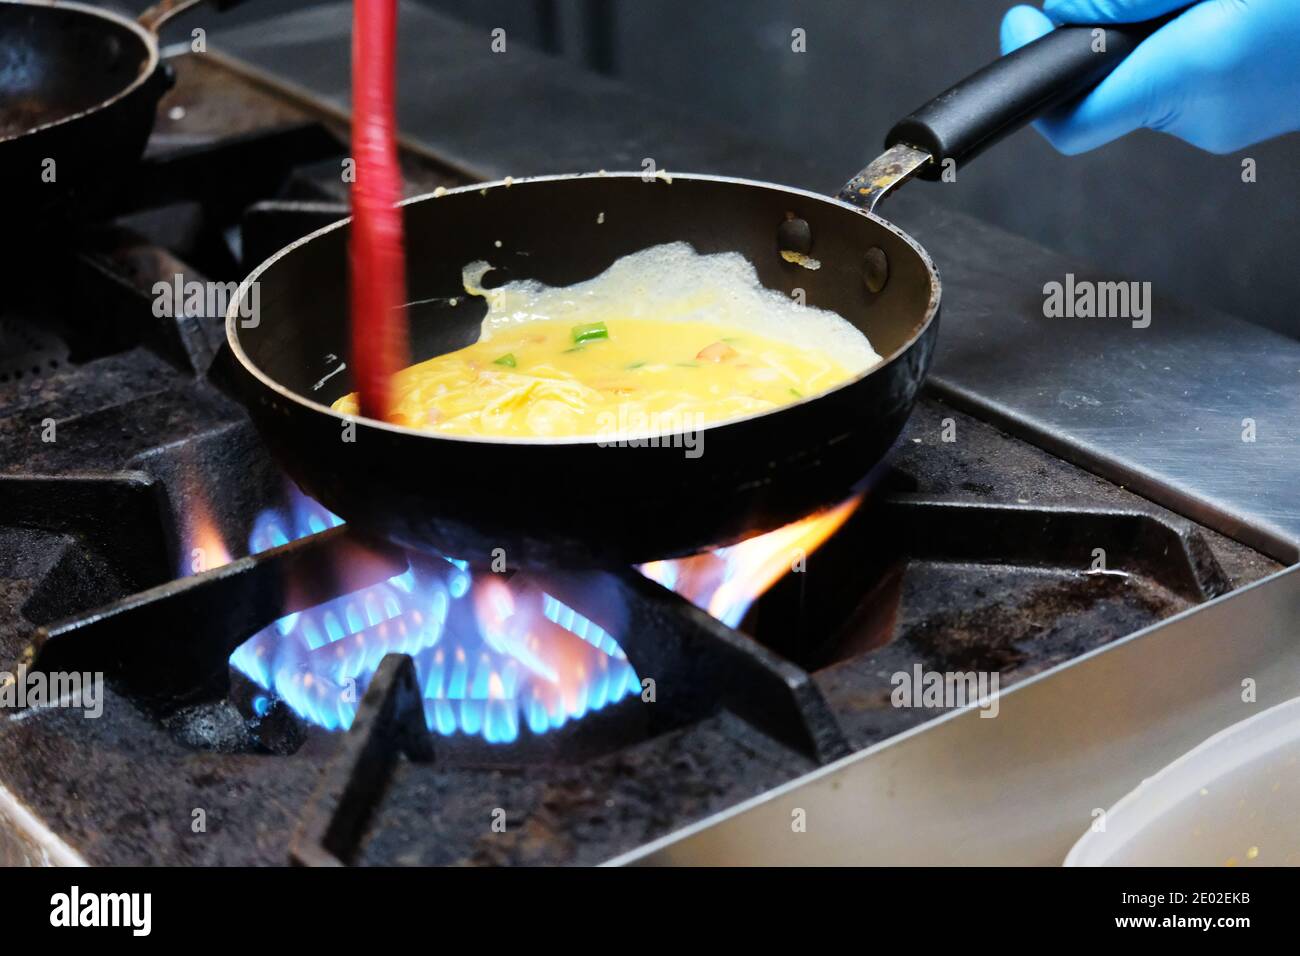 Frying egg in a pan on hot gas stove Stock Photo